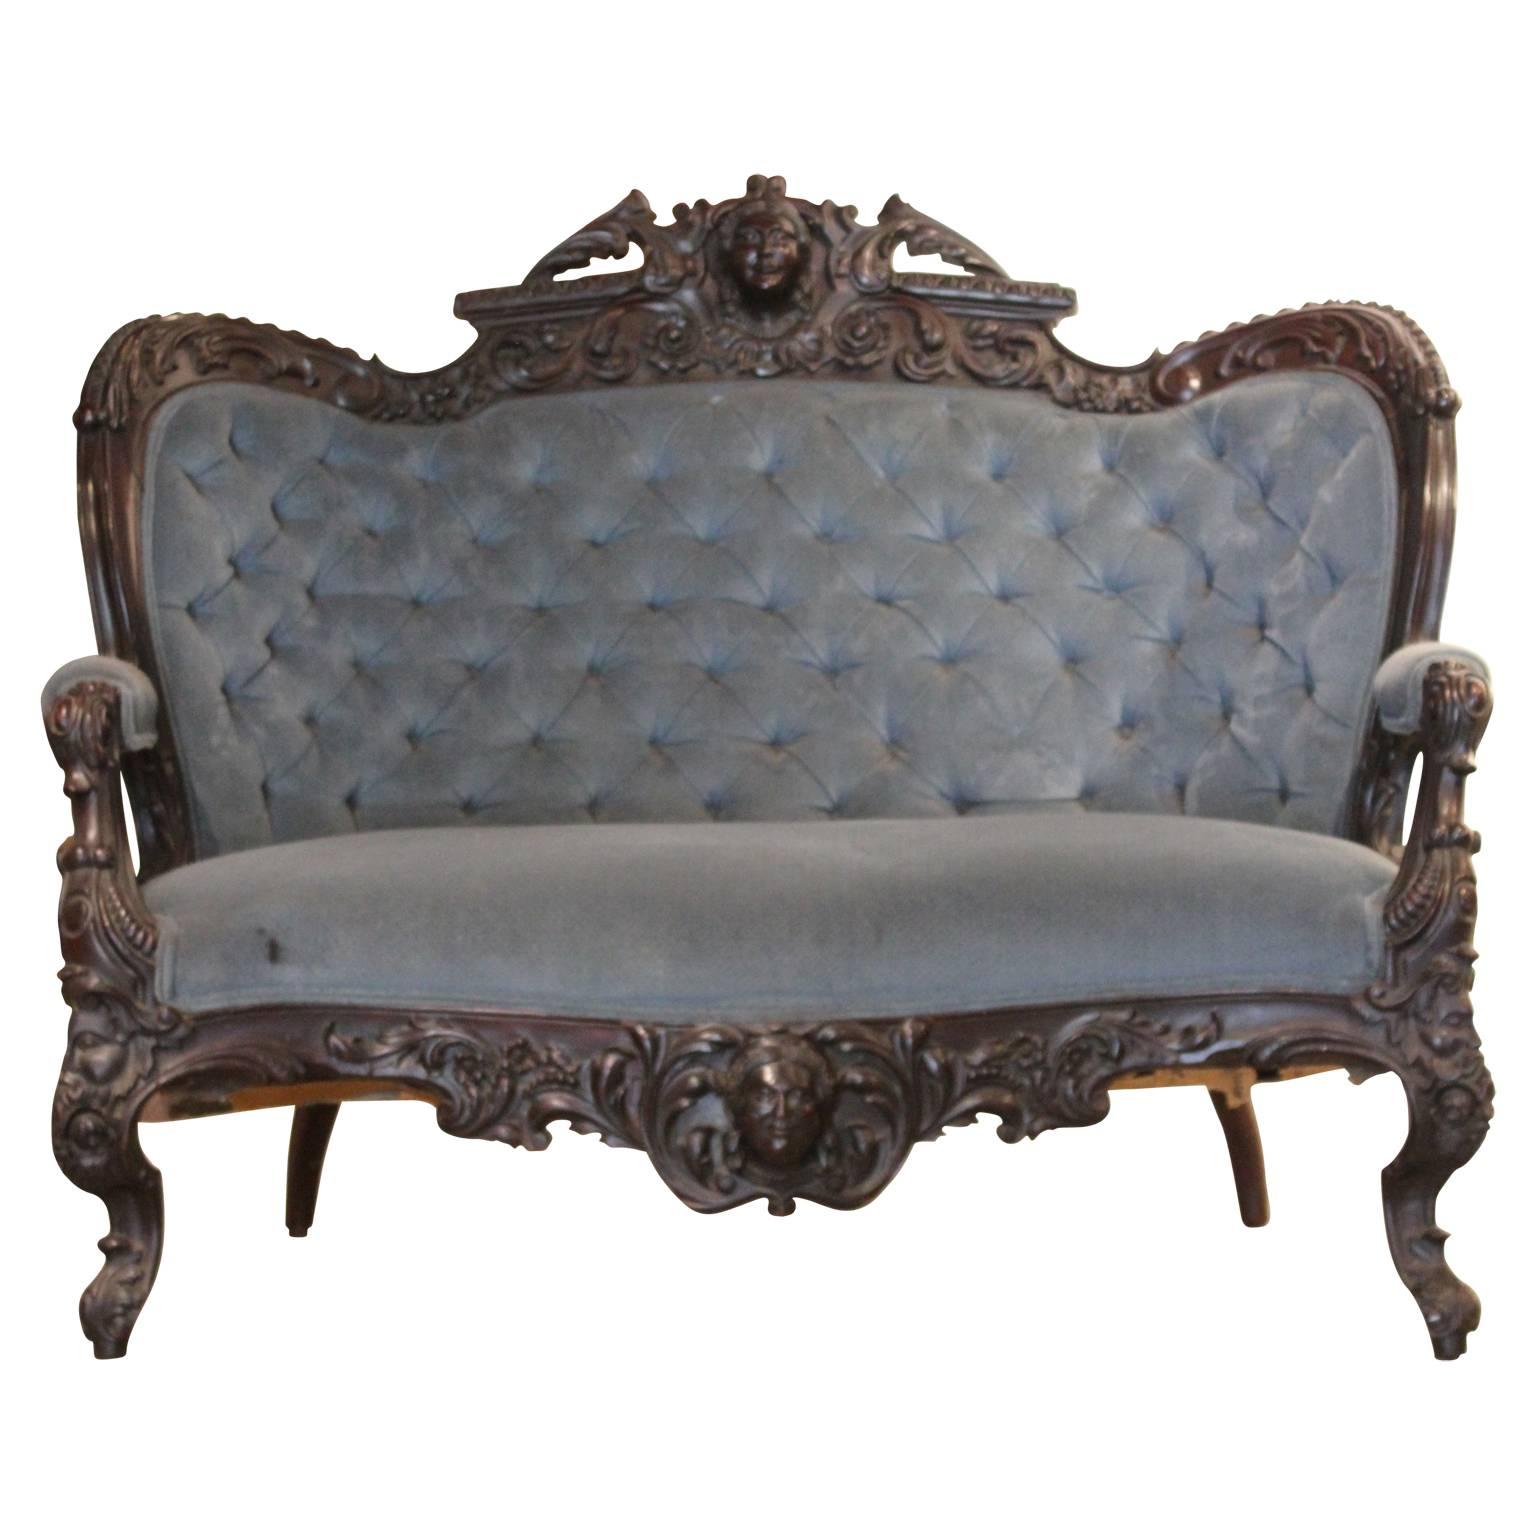 American Rococo Renaissance Revival four-piece parlour set made from mahogany. Consists of one loveseat and three side chairs. In original fabric. 

Dimensions:

Loveseat: 45 in. H x 54 in. W x 39 in. H x 18 in. SH
Side chairs: 43.5 in. H x 22